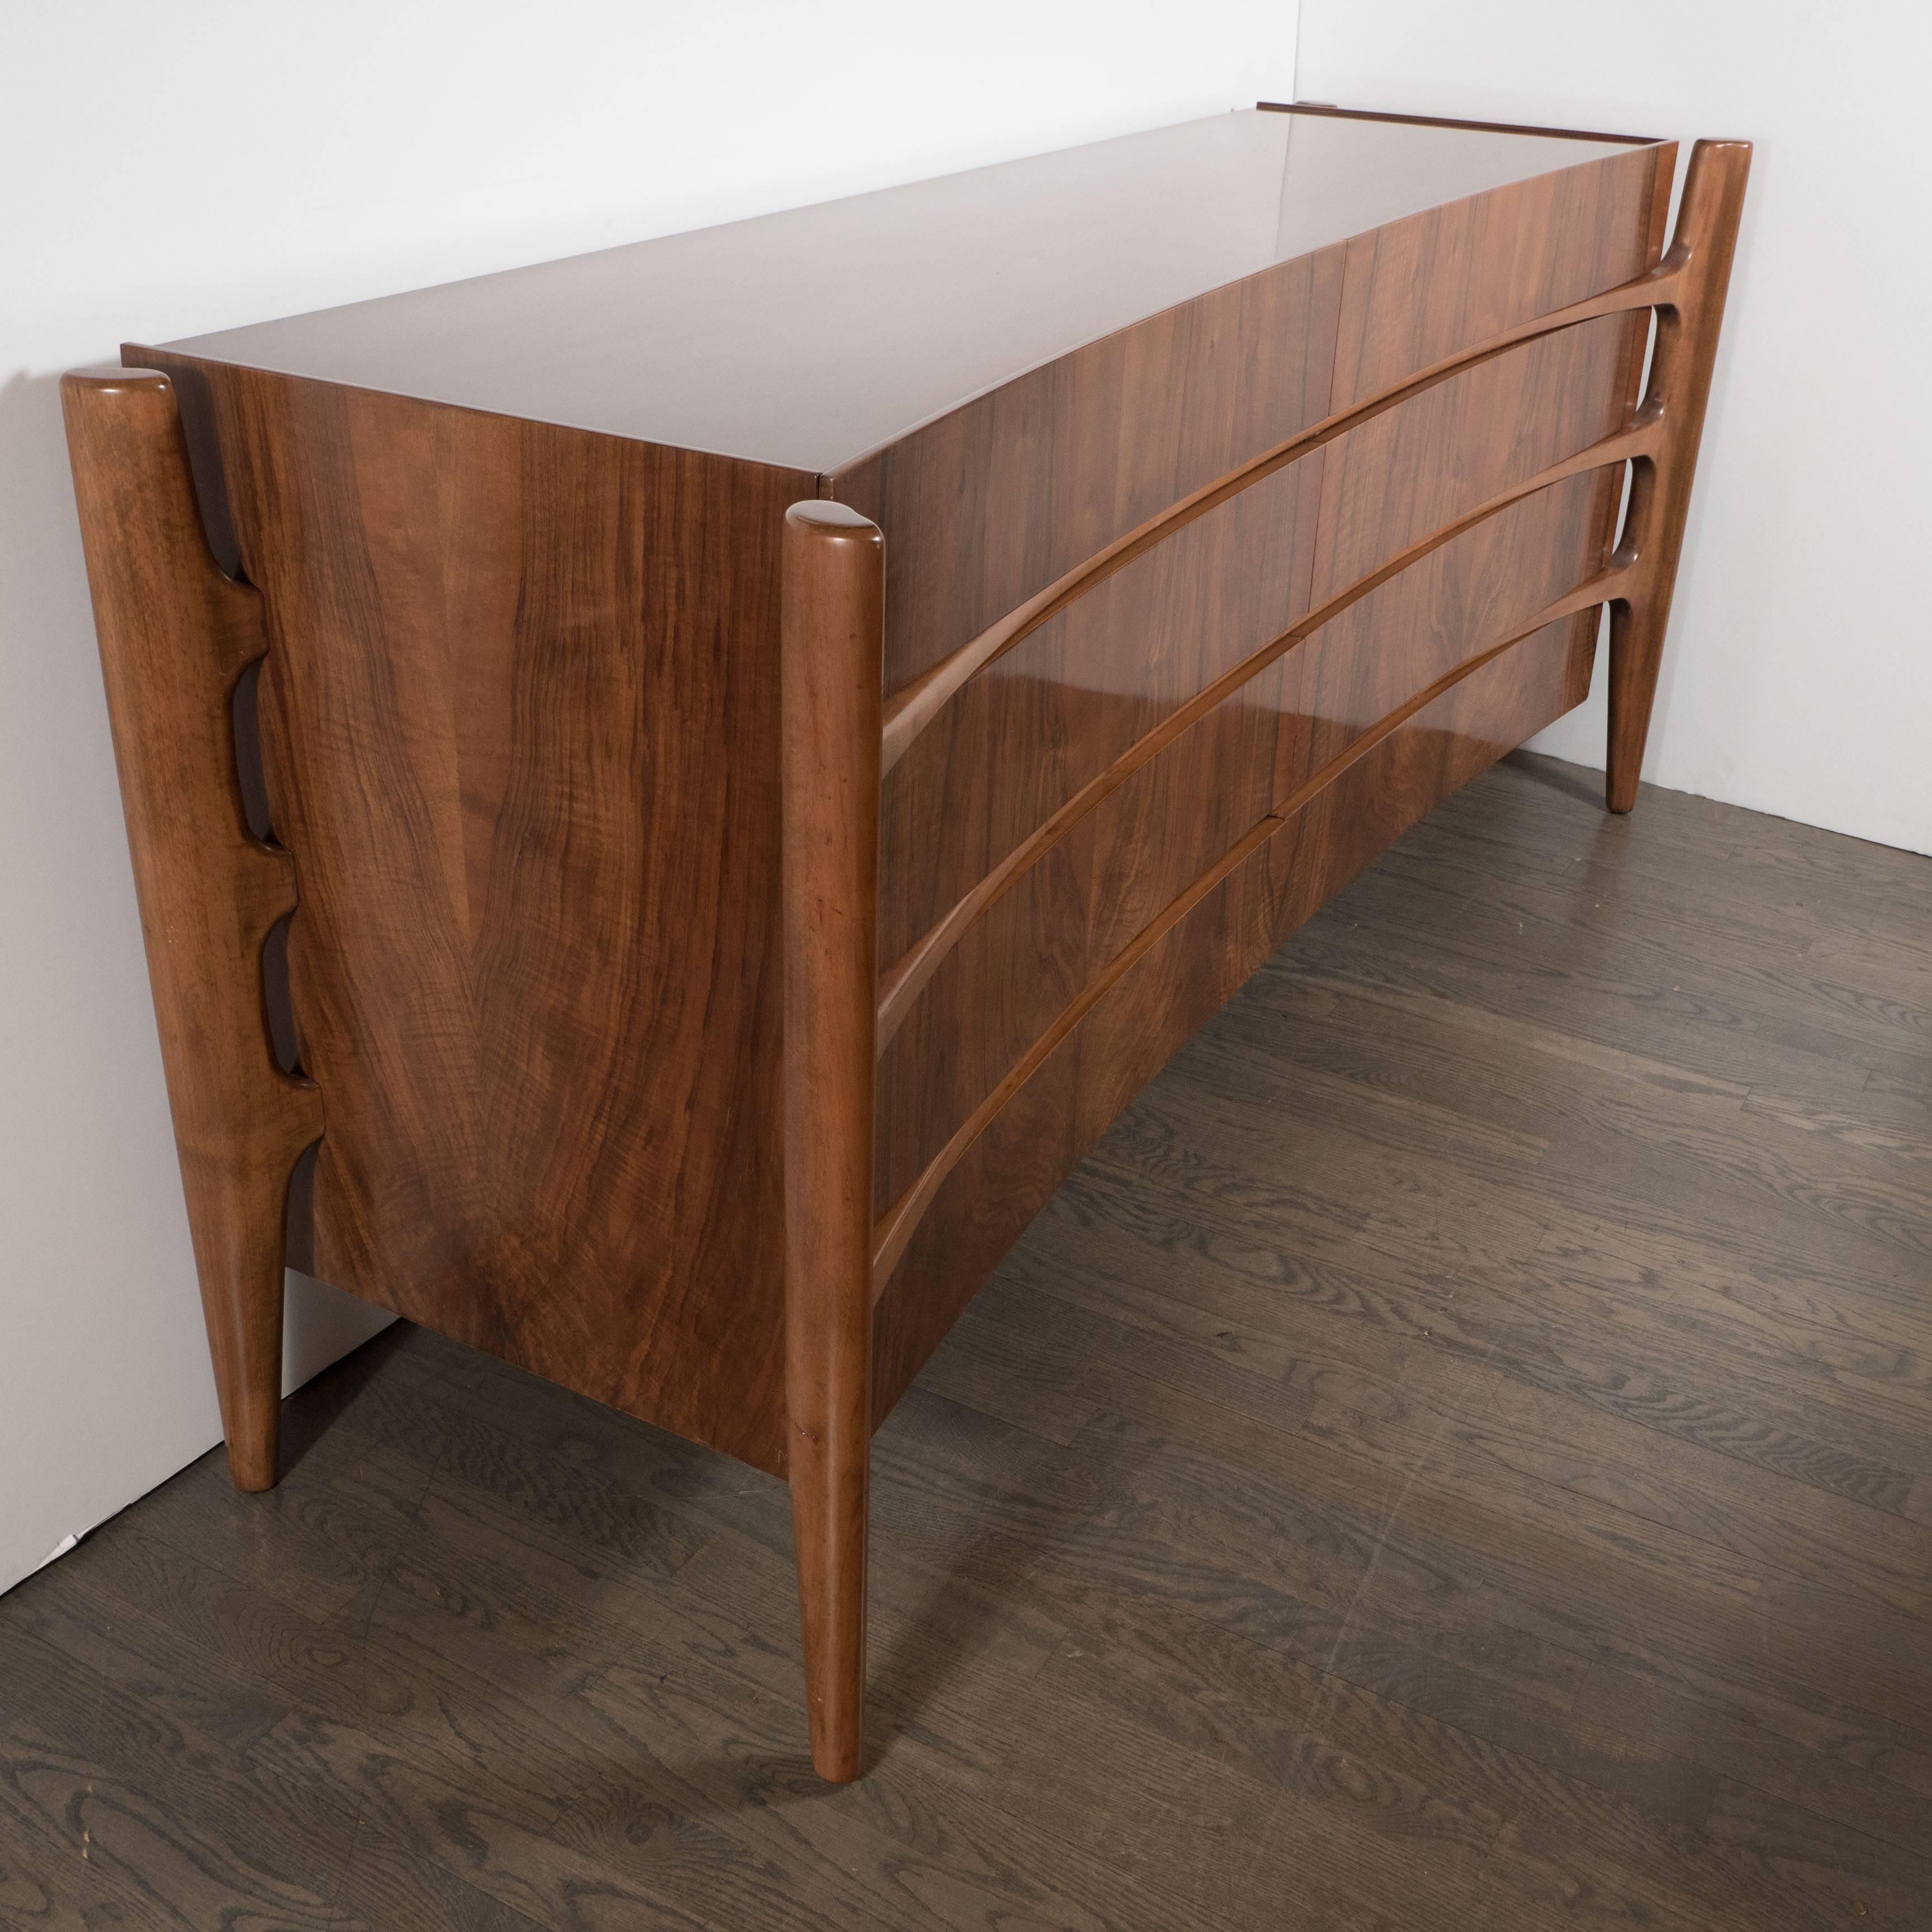 The celebrated Mid Century Modern Swedish designer William Hinn realized this exceptional and rare eight-drawer walnut dresser circa 1950. It features four splines, detached from the body of the cabinet, that descend into tapered legs. The splines